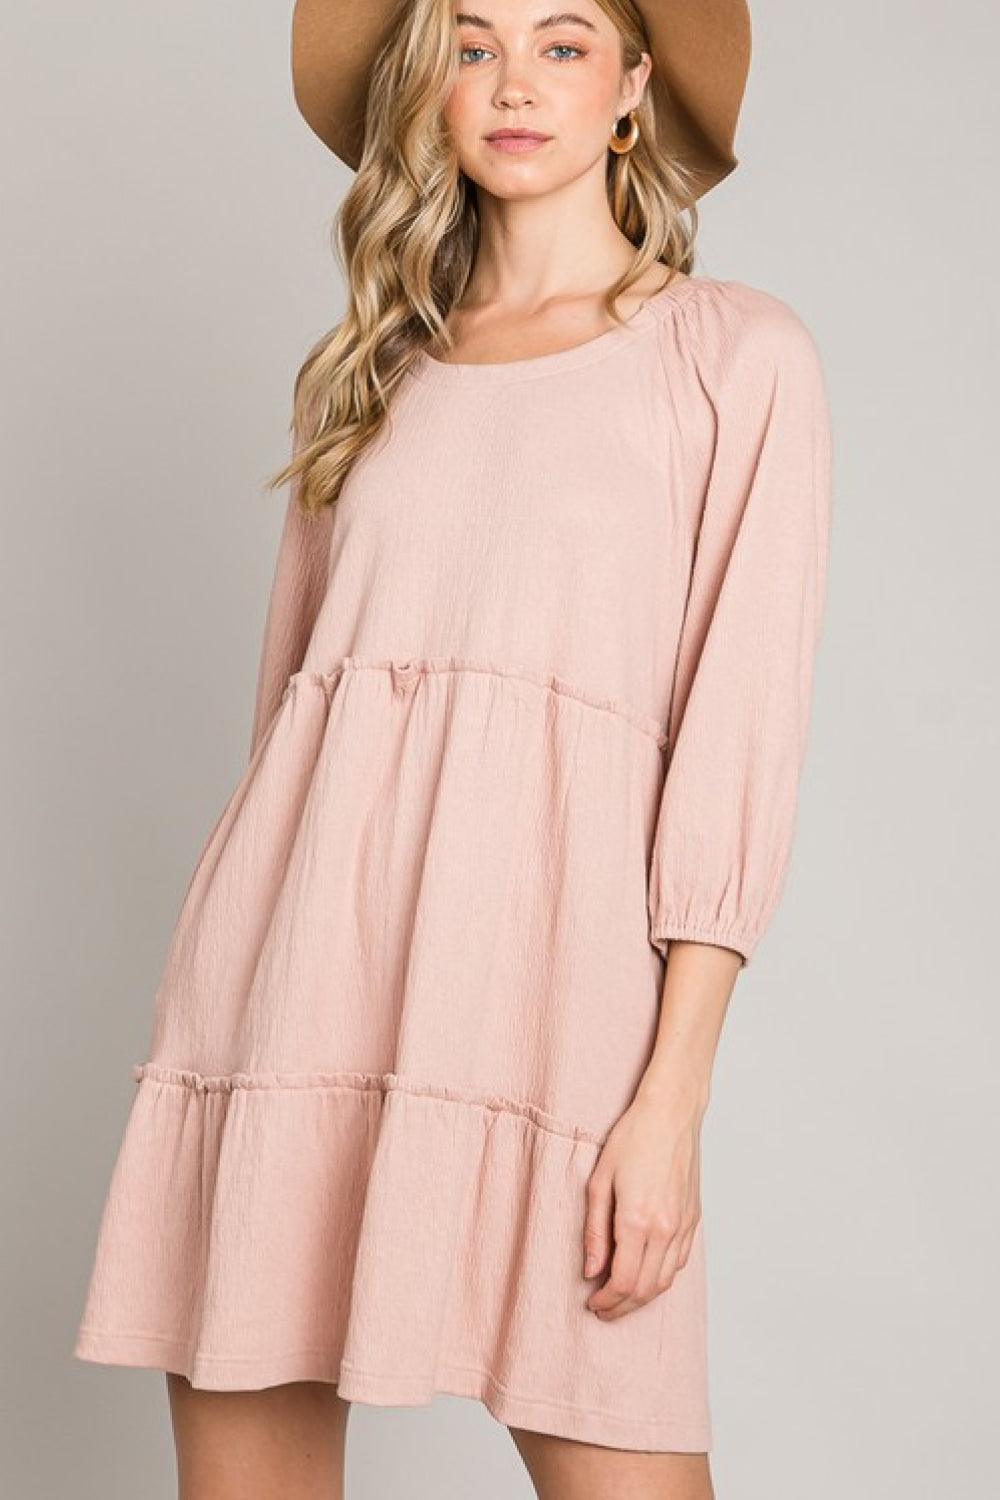 Tiered Tie-Back Dress (Rayon/Poly/Spandex) (Sizes: S - 3XL) (Sale Price: $88.39 CAD)